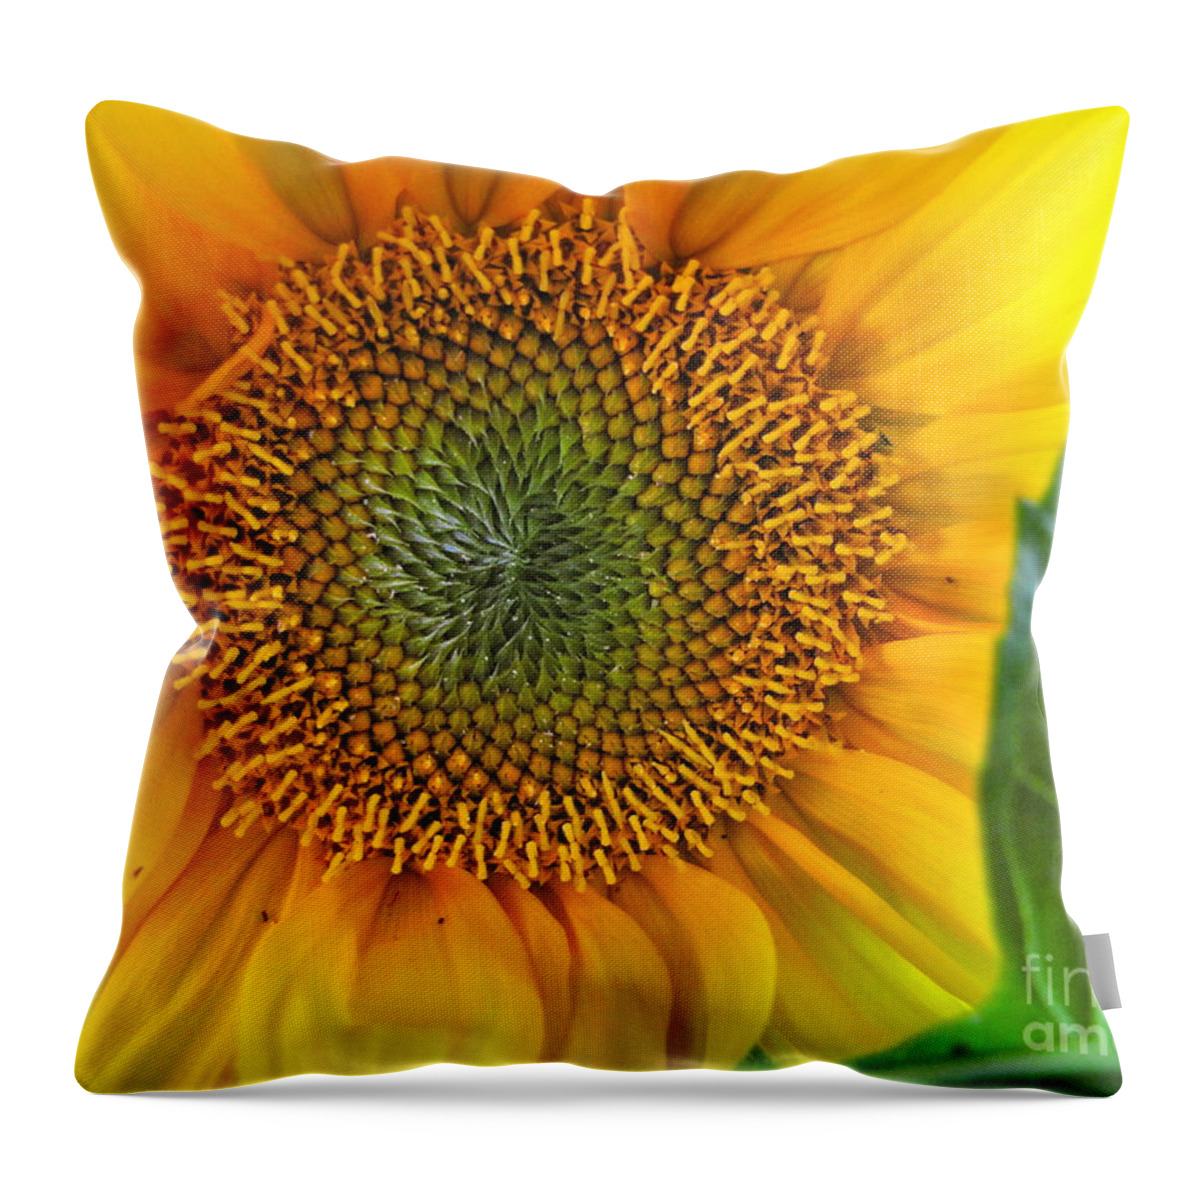 Photography Throw Pillow featuring the photograph The Last Sunflower by Sean Griffin